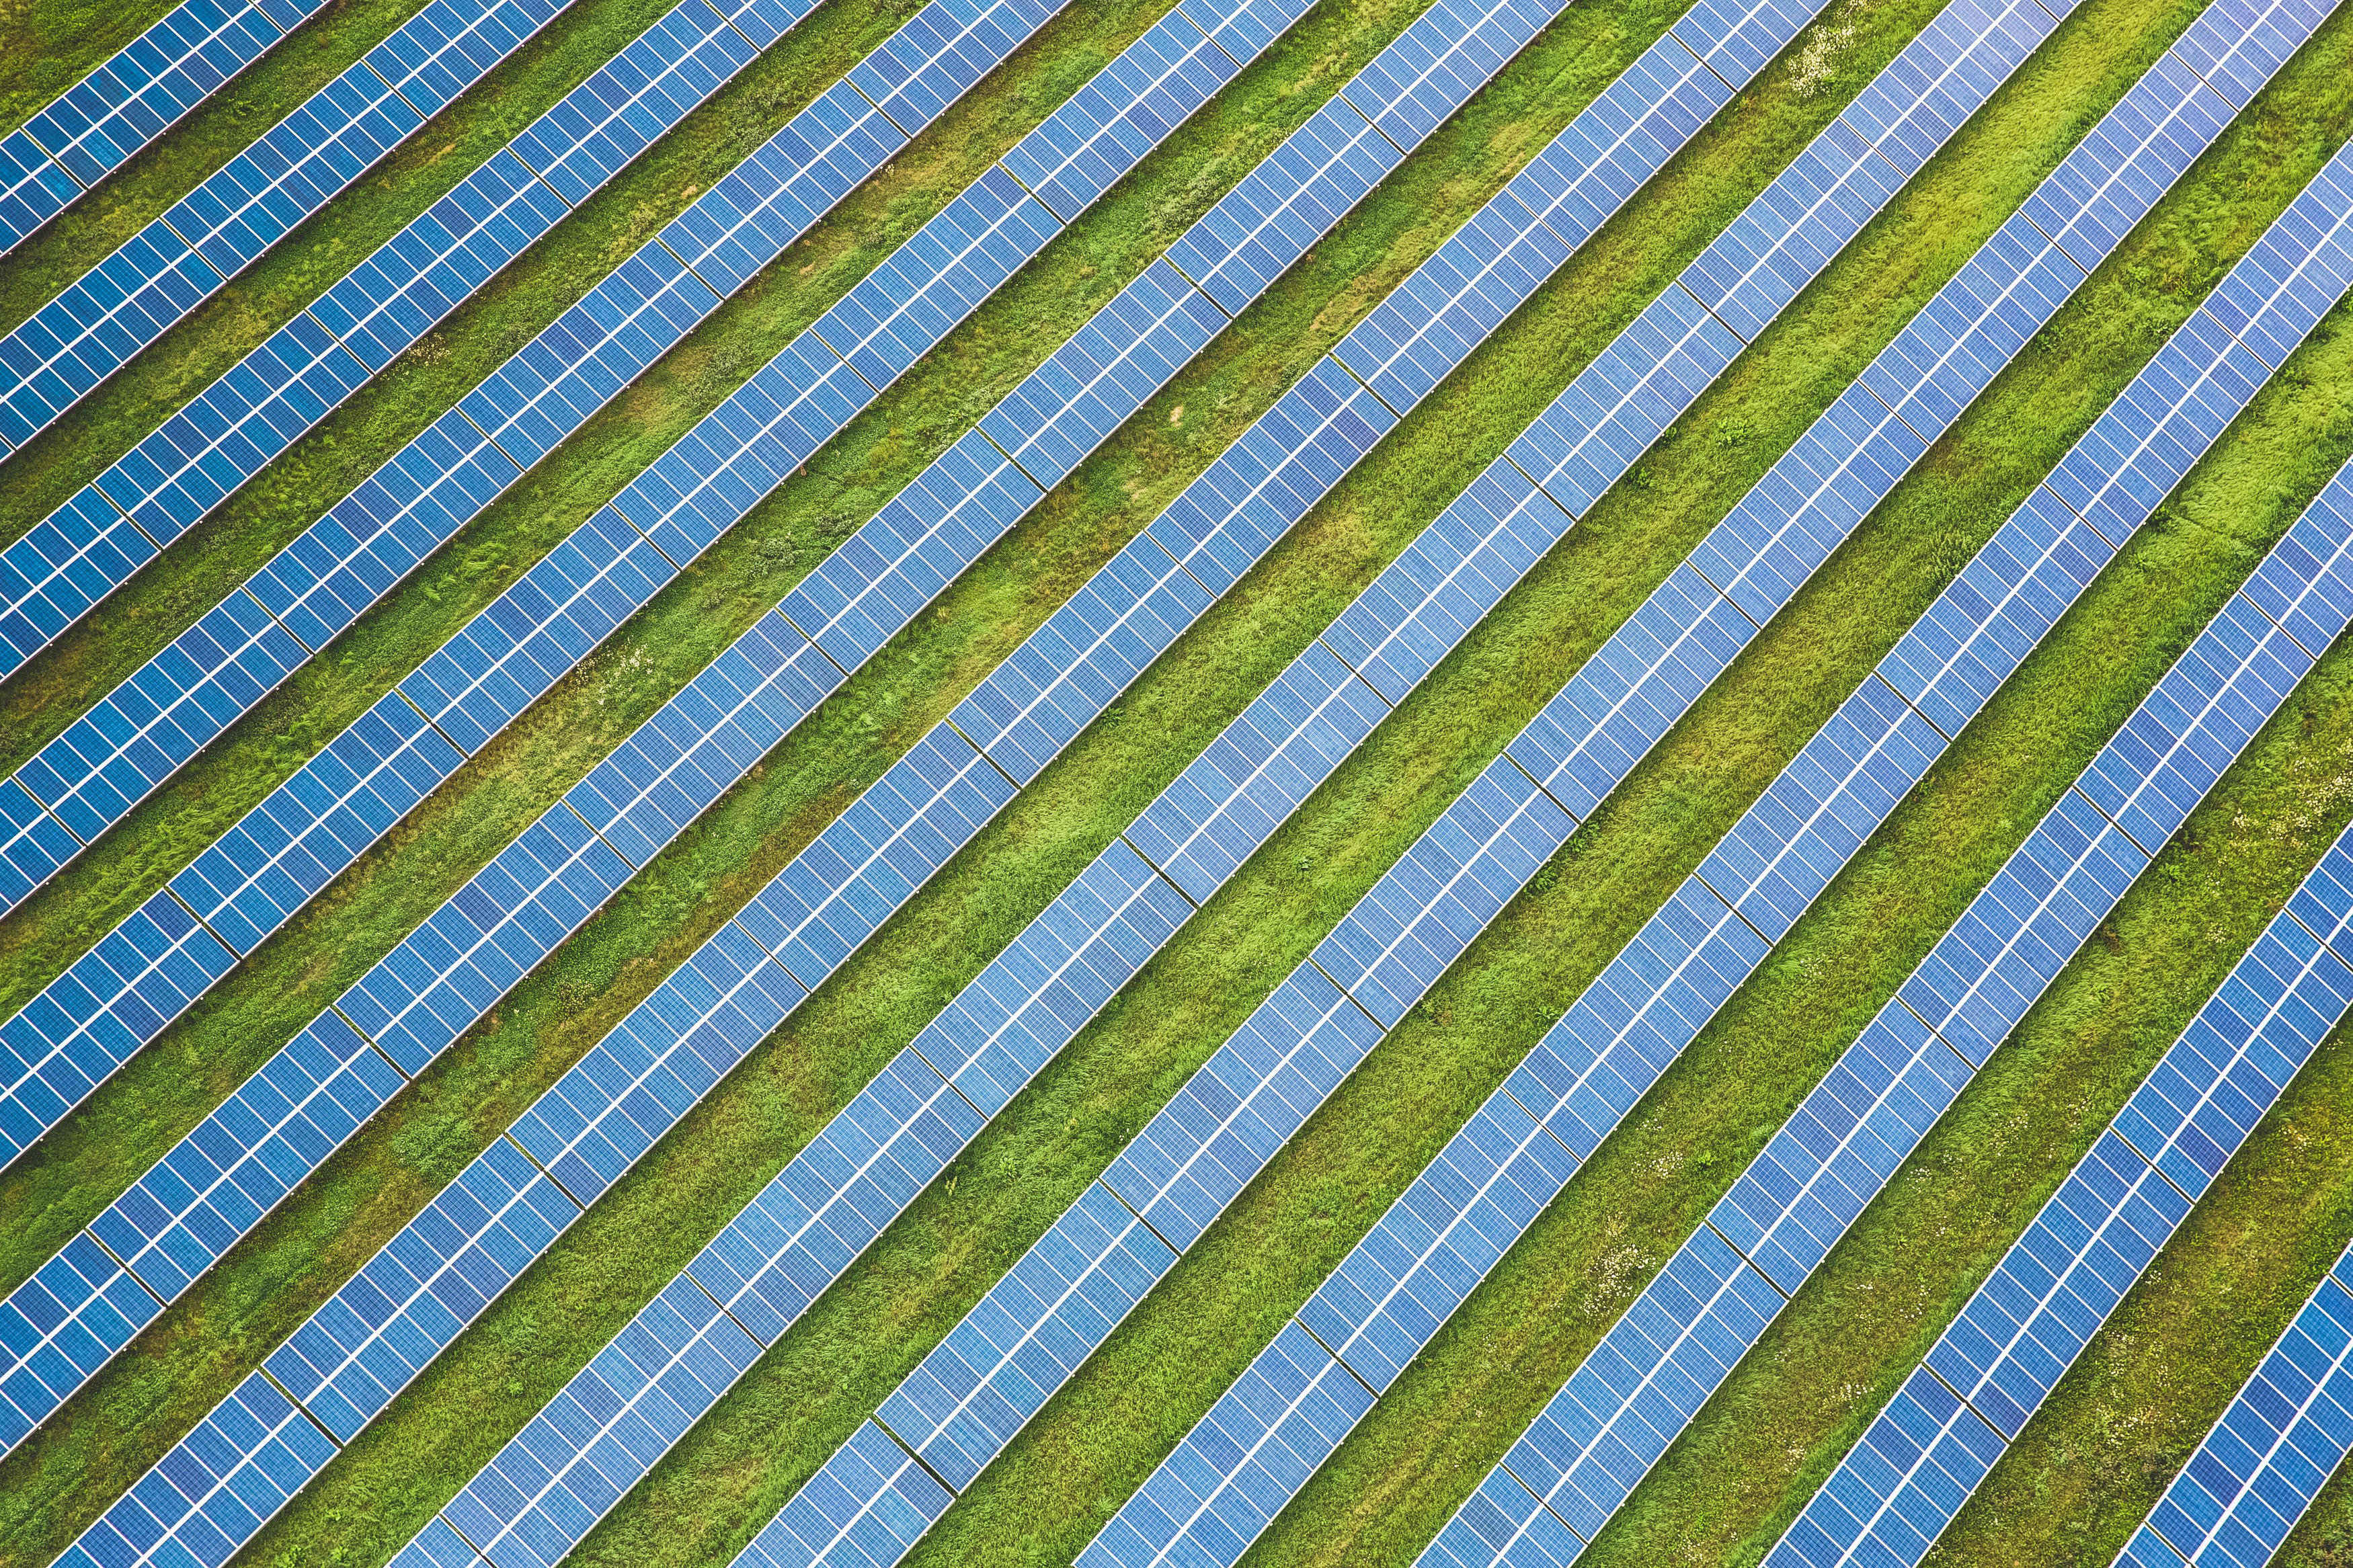 solar panels, view from above, texture, textures, field, rows, ranks